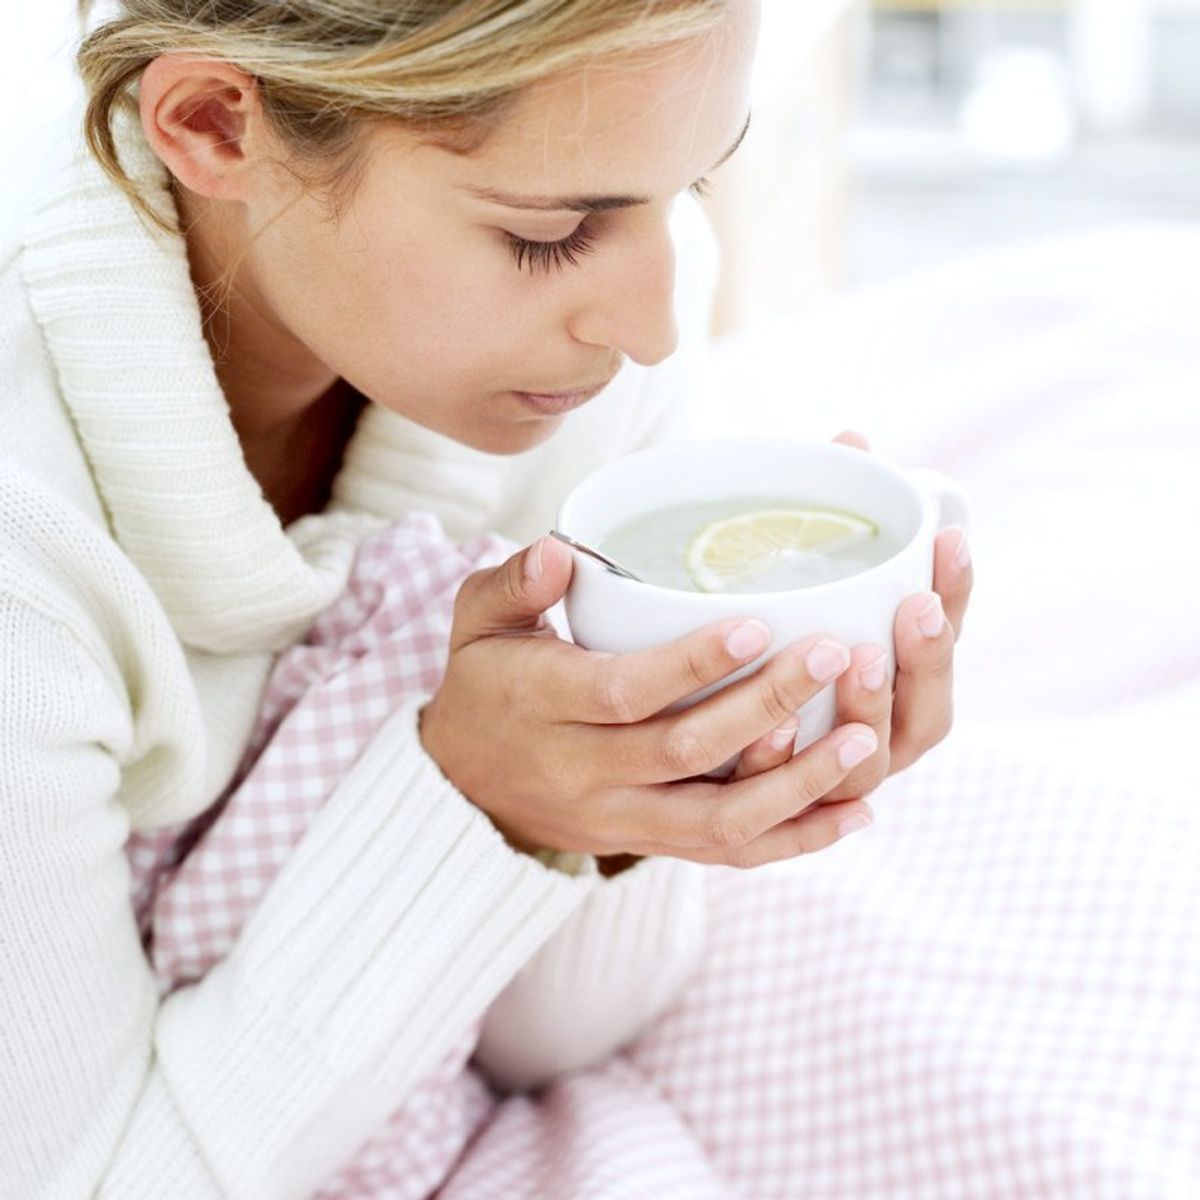 Winter Causes Colds: Fact Or Myth?